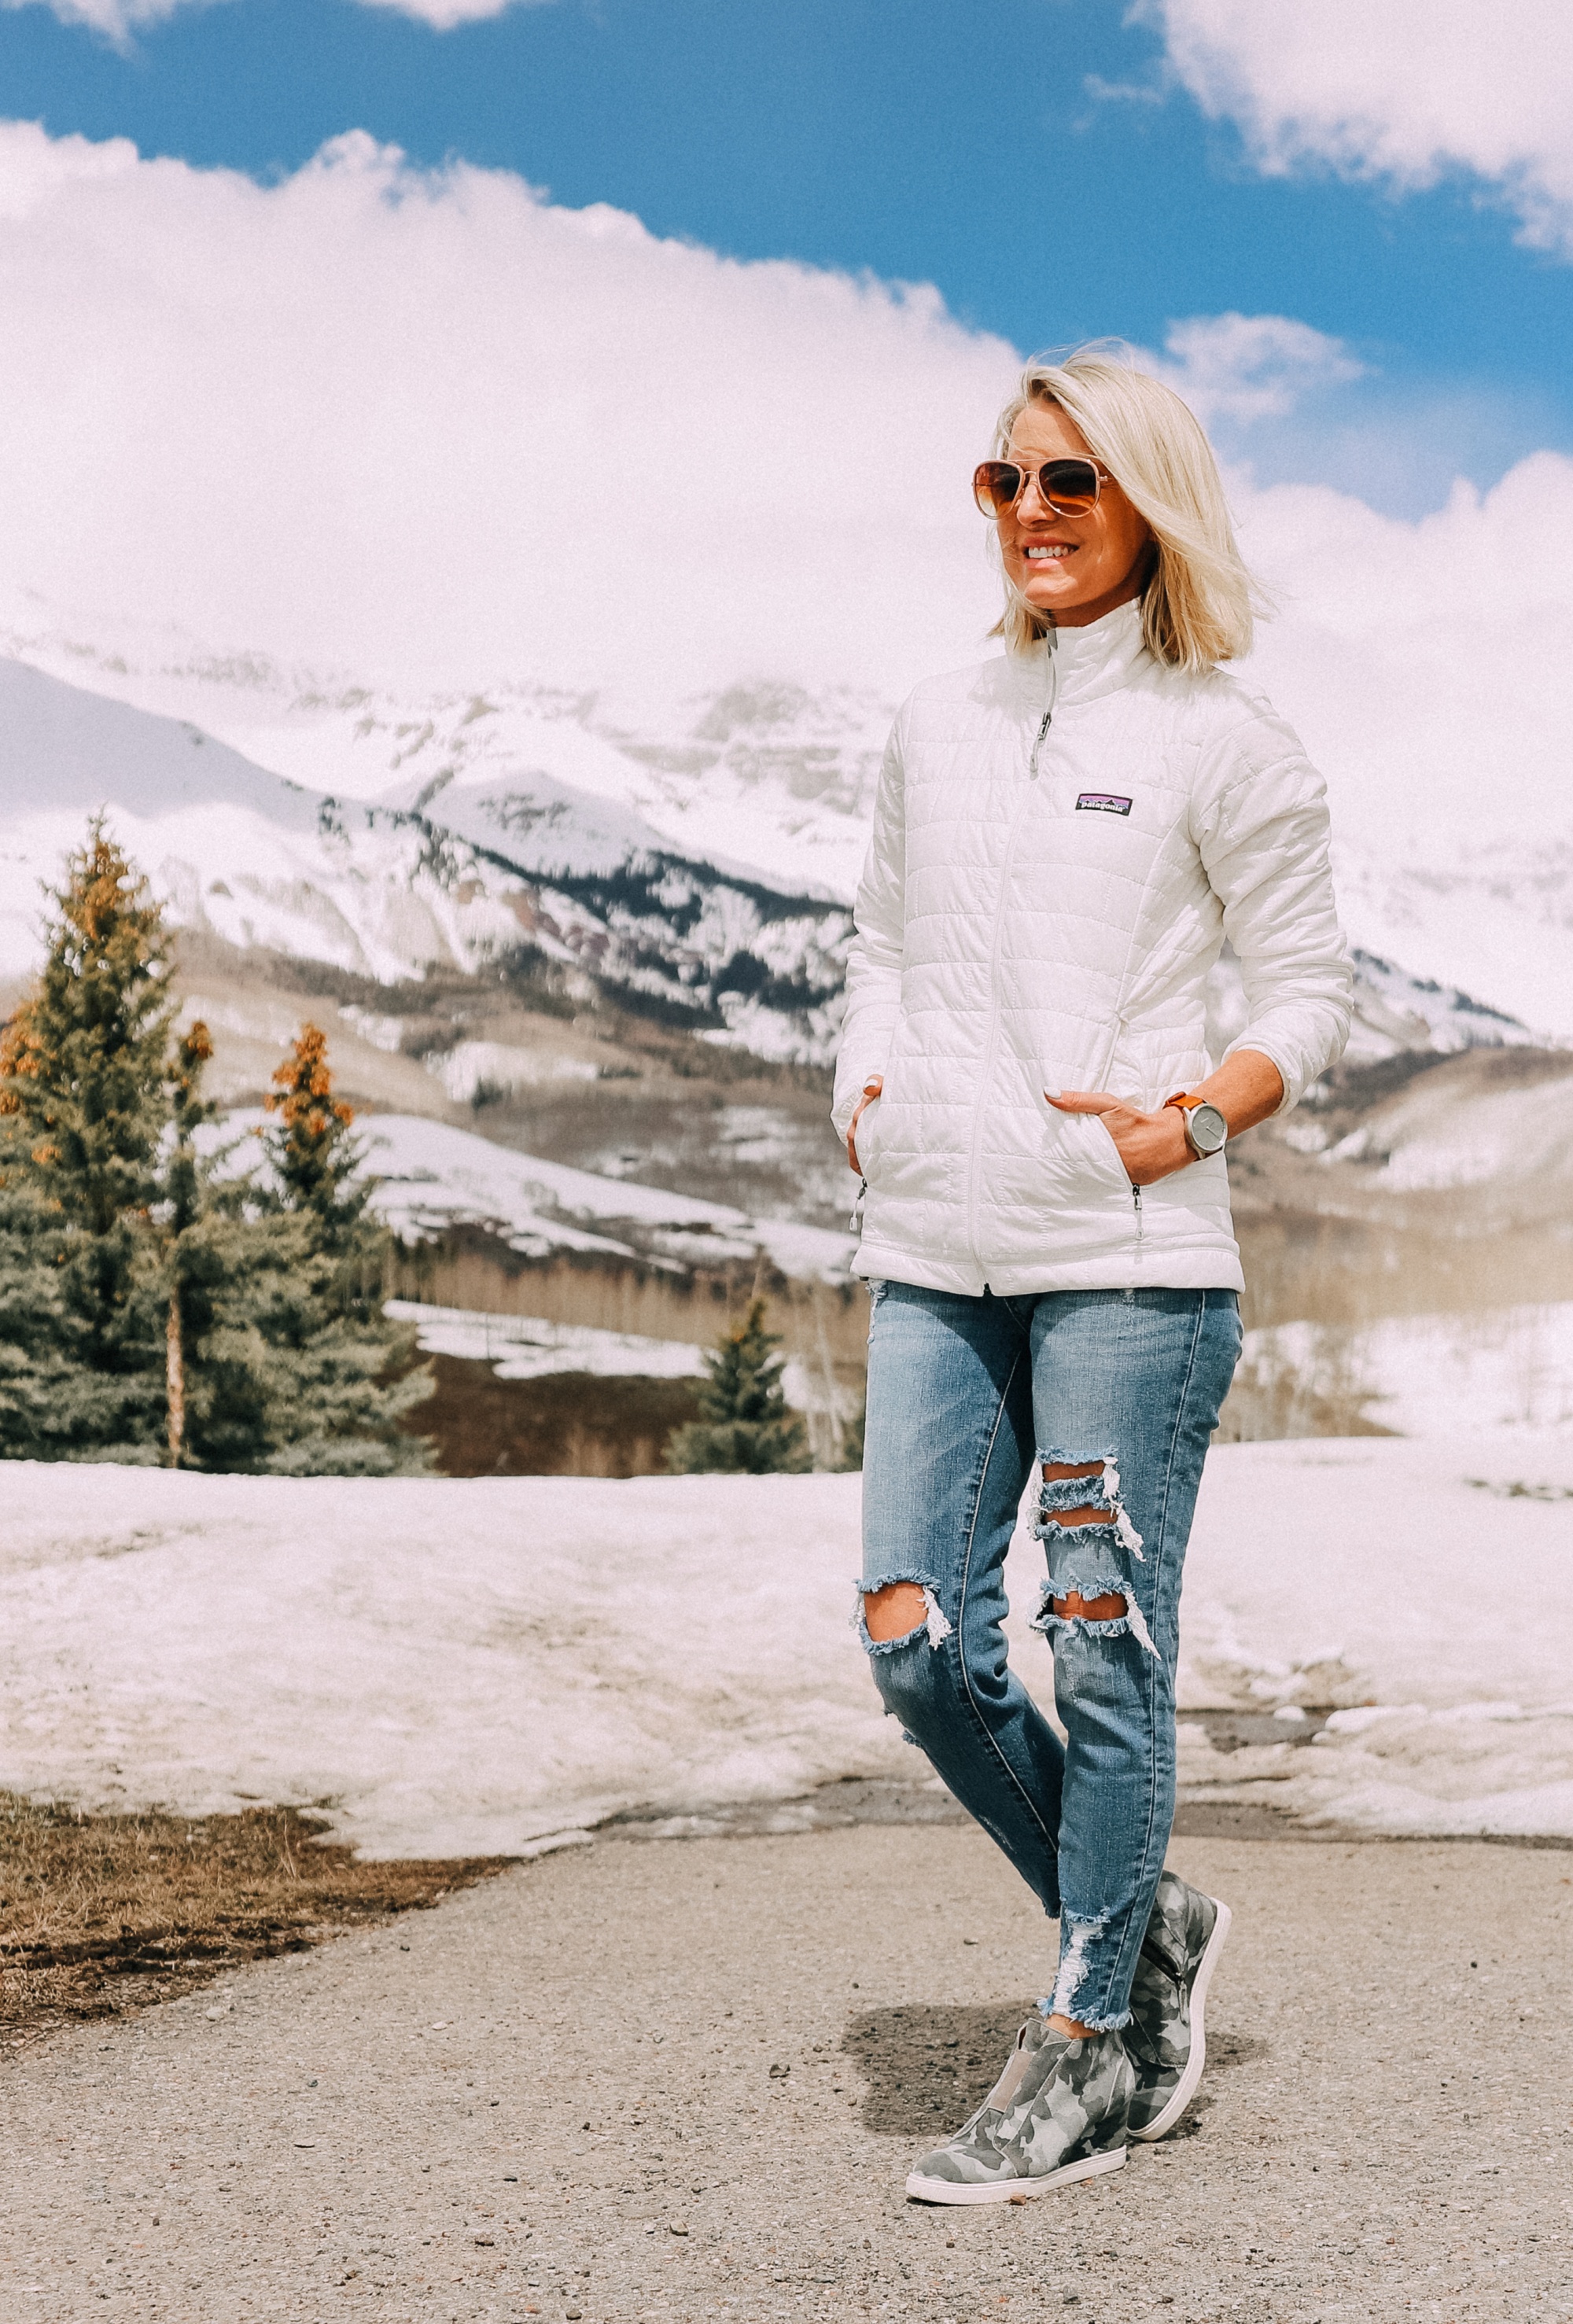 Stylish Smartwatch, Fashion Blogger Erin Busbee of BusbeeStyle.com featuring the Vivomove Hybrid Smartwatch from Garmin in Telluride, CO